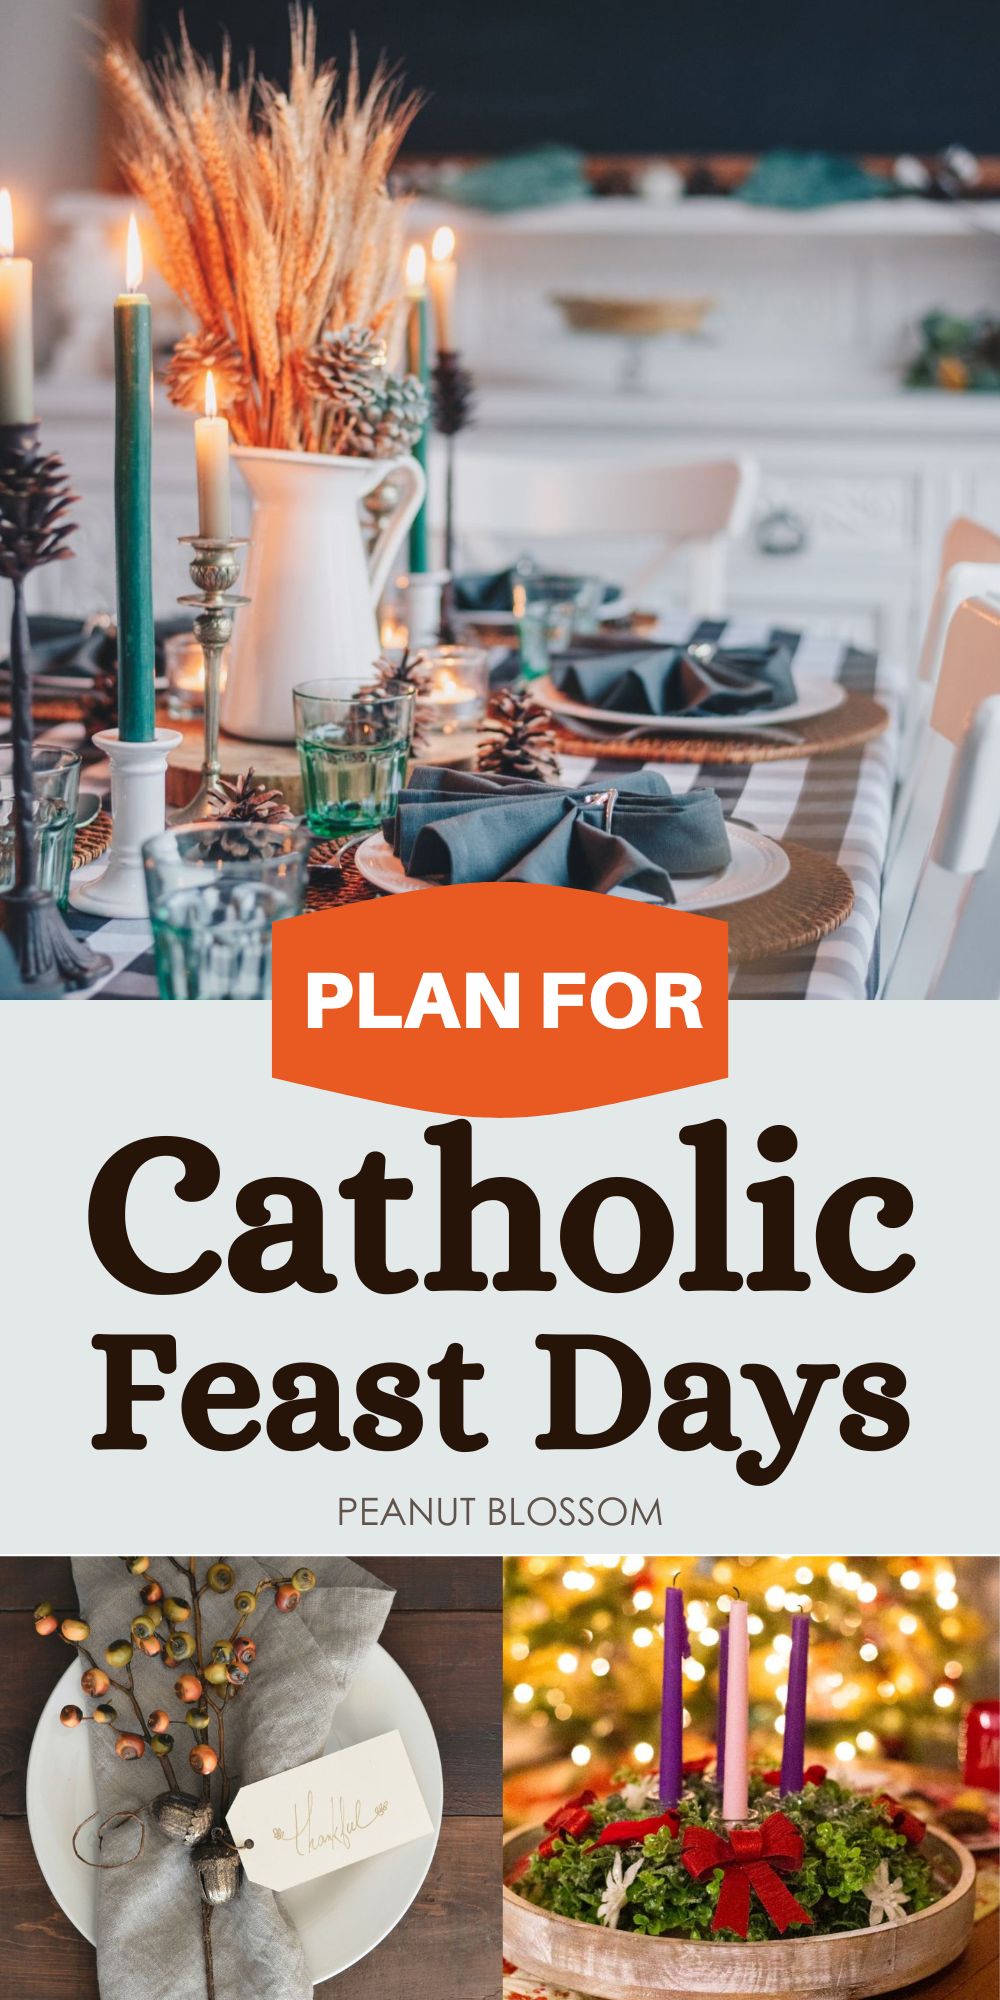 The photo collage shows several family dinner table settings for a Catholic feast.